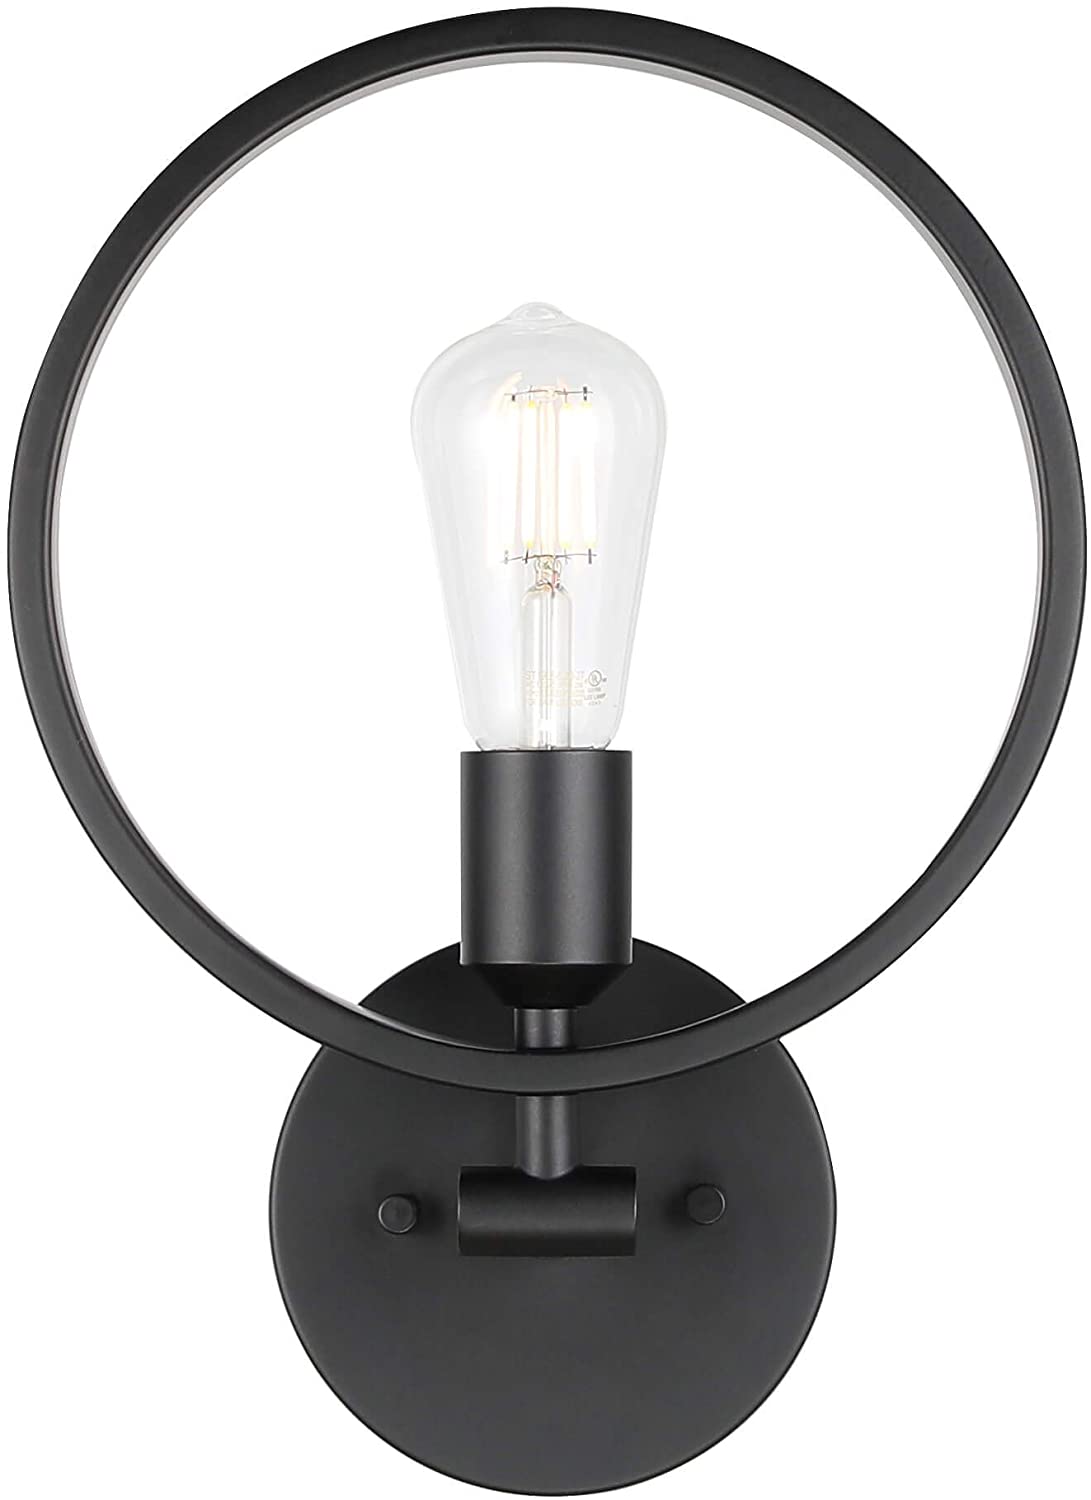 Industrial round wall light simplicity black wall sconce